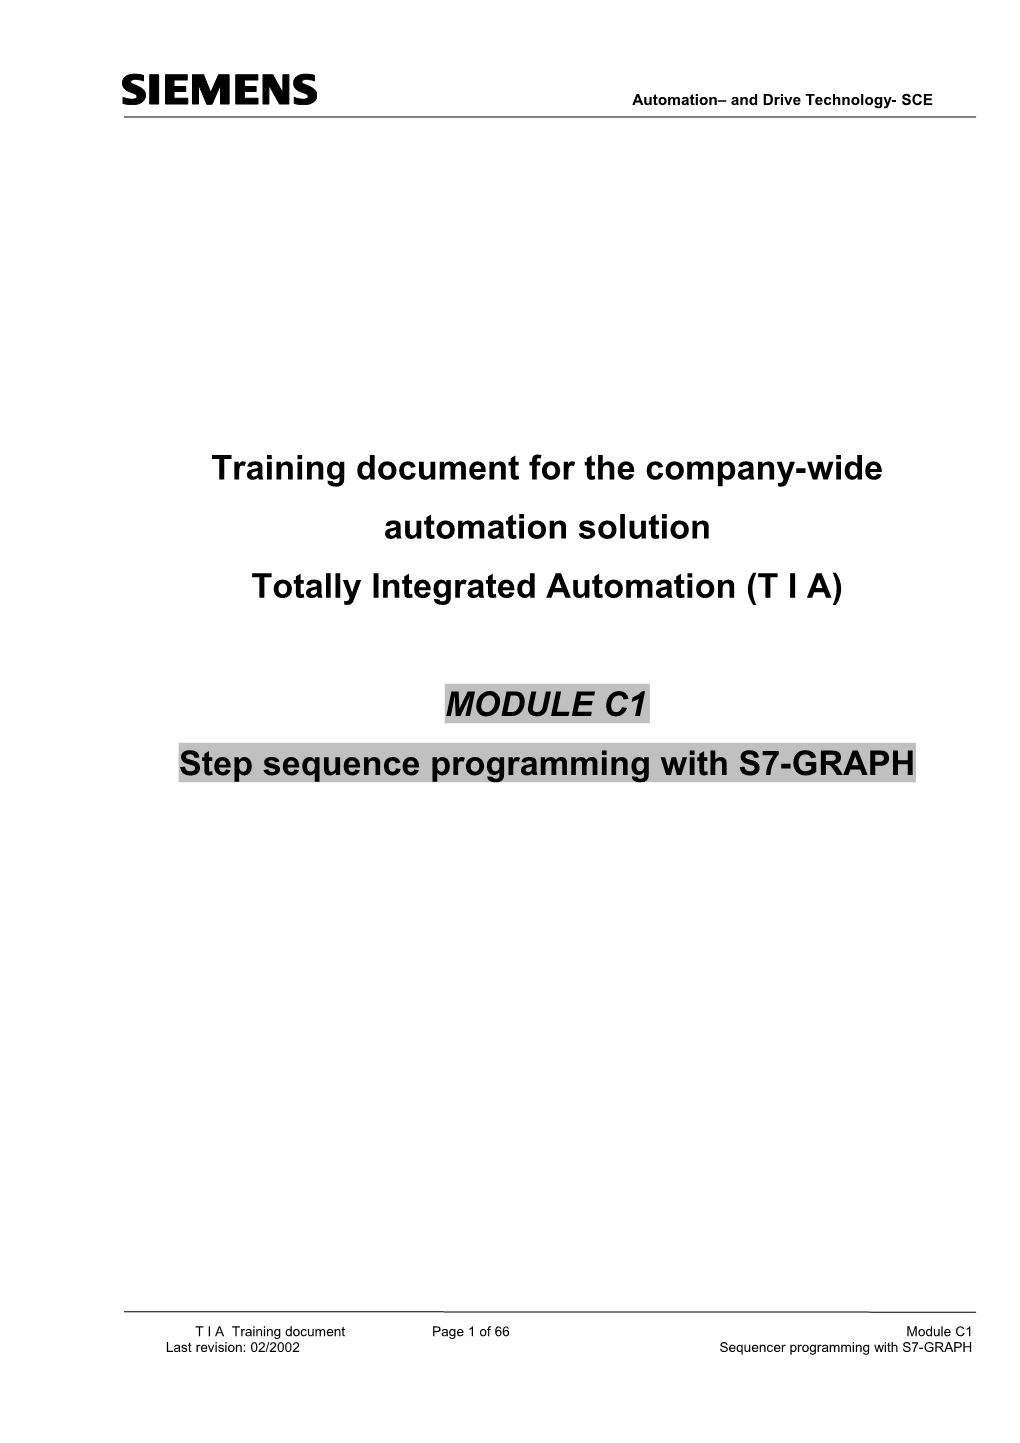 Training Document for the Company-Wide